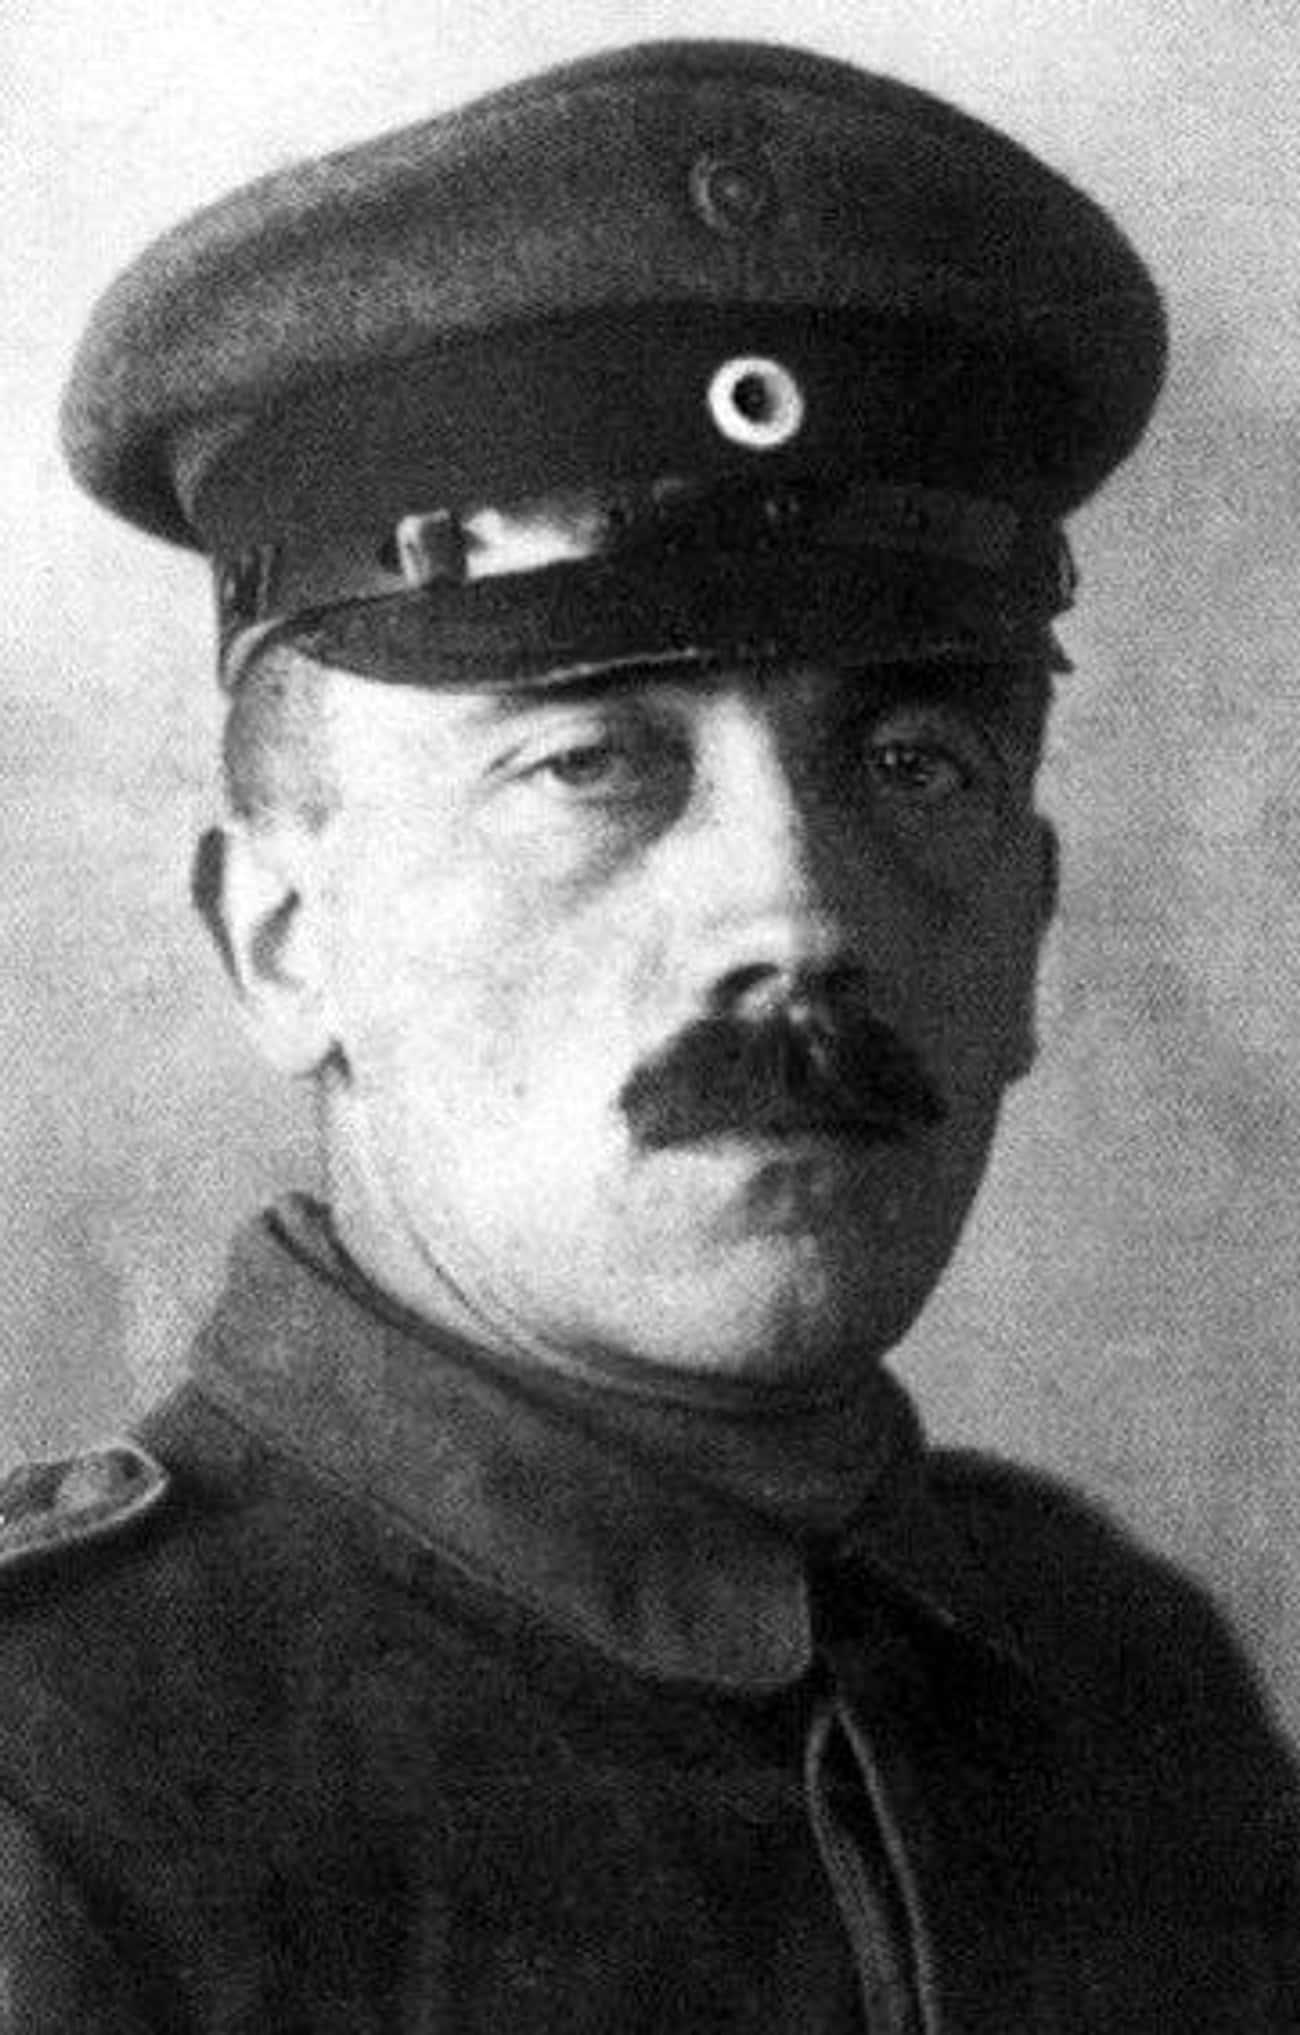 A Strange Voice Saved Hitler From A Shell Attack In WWI